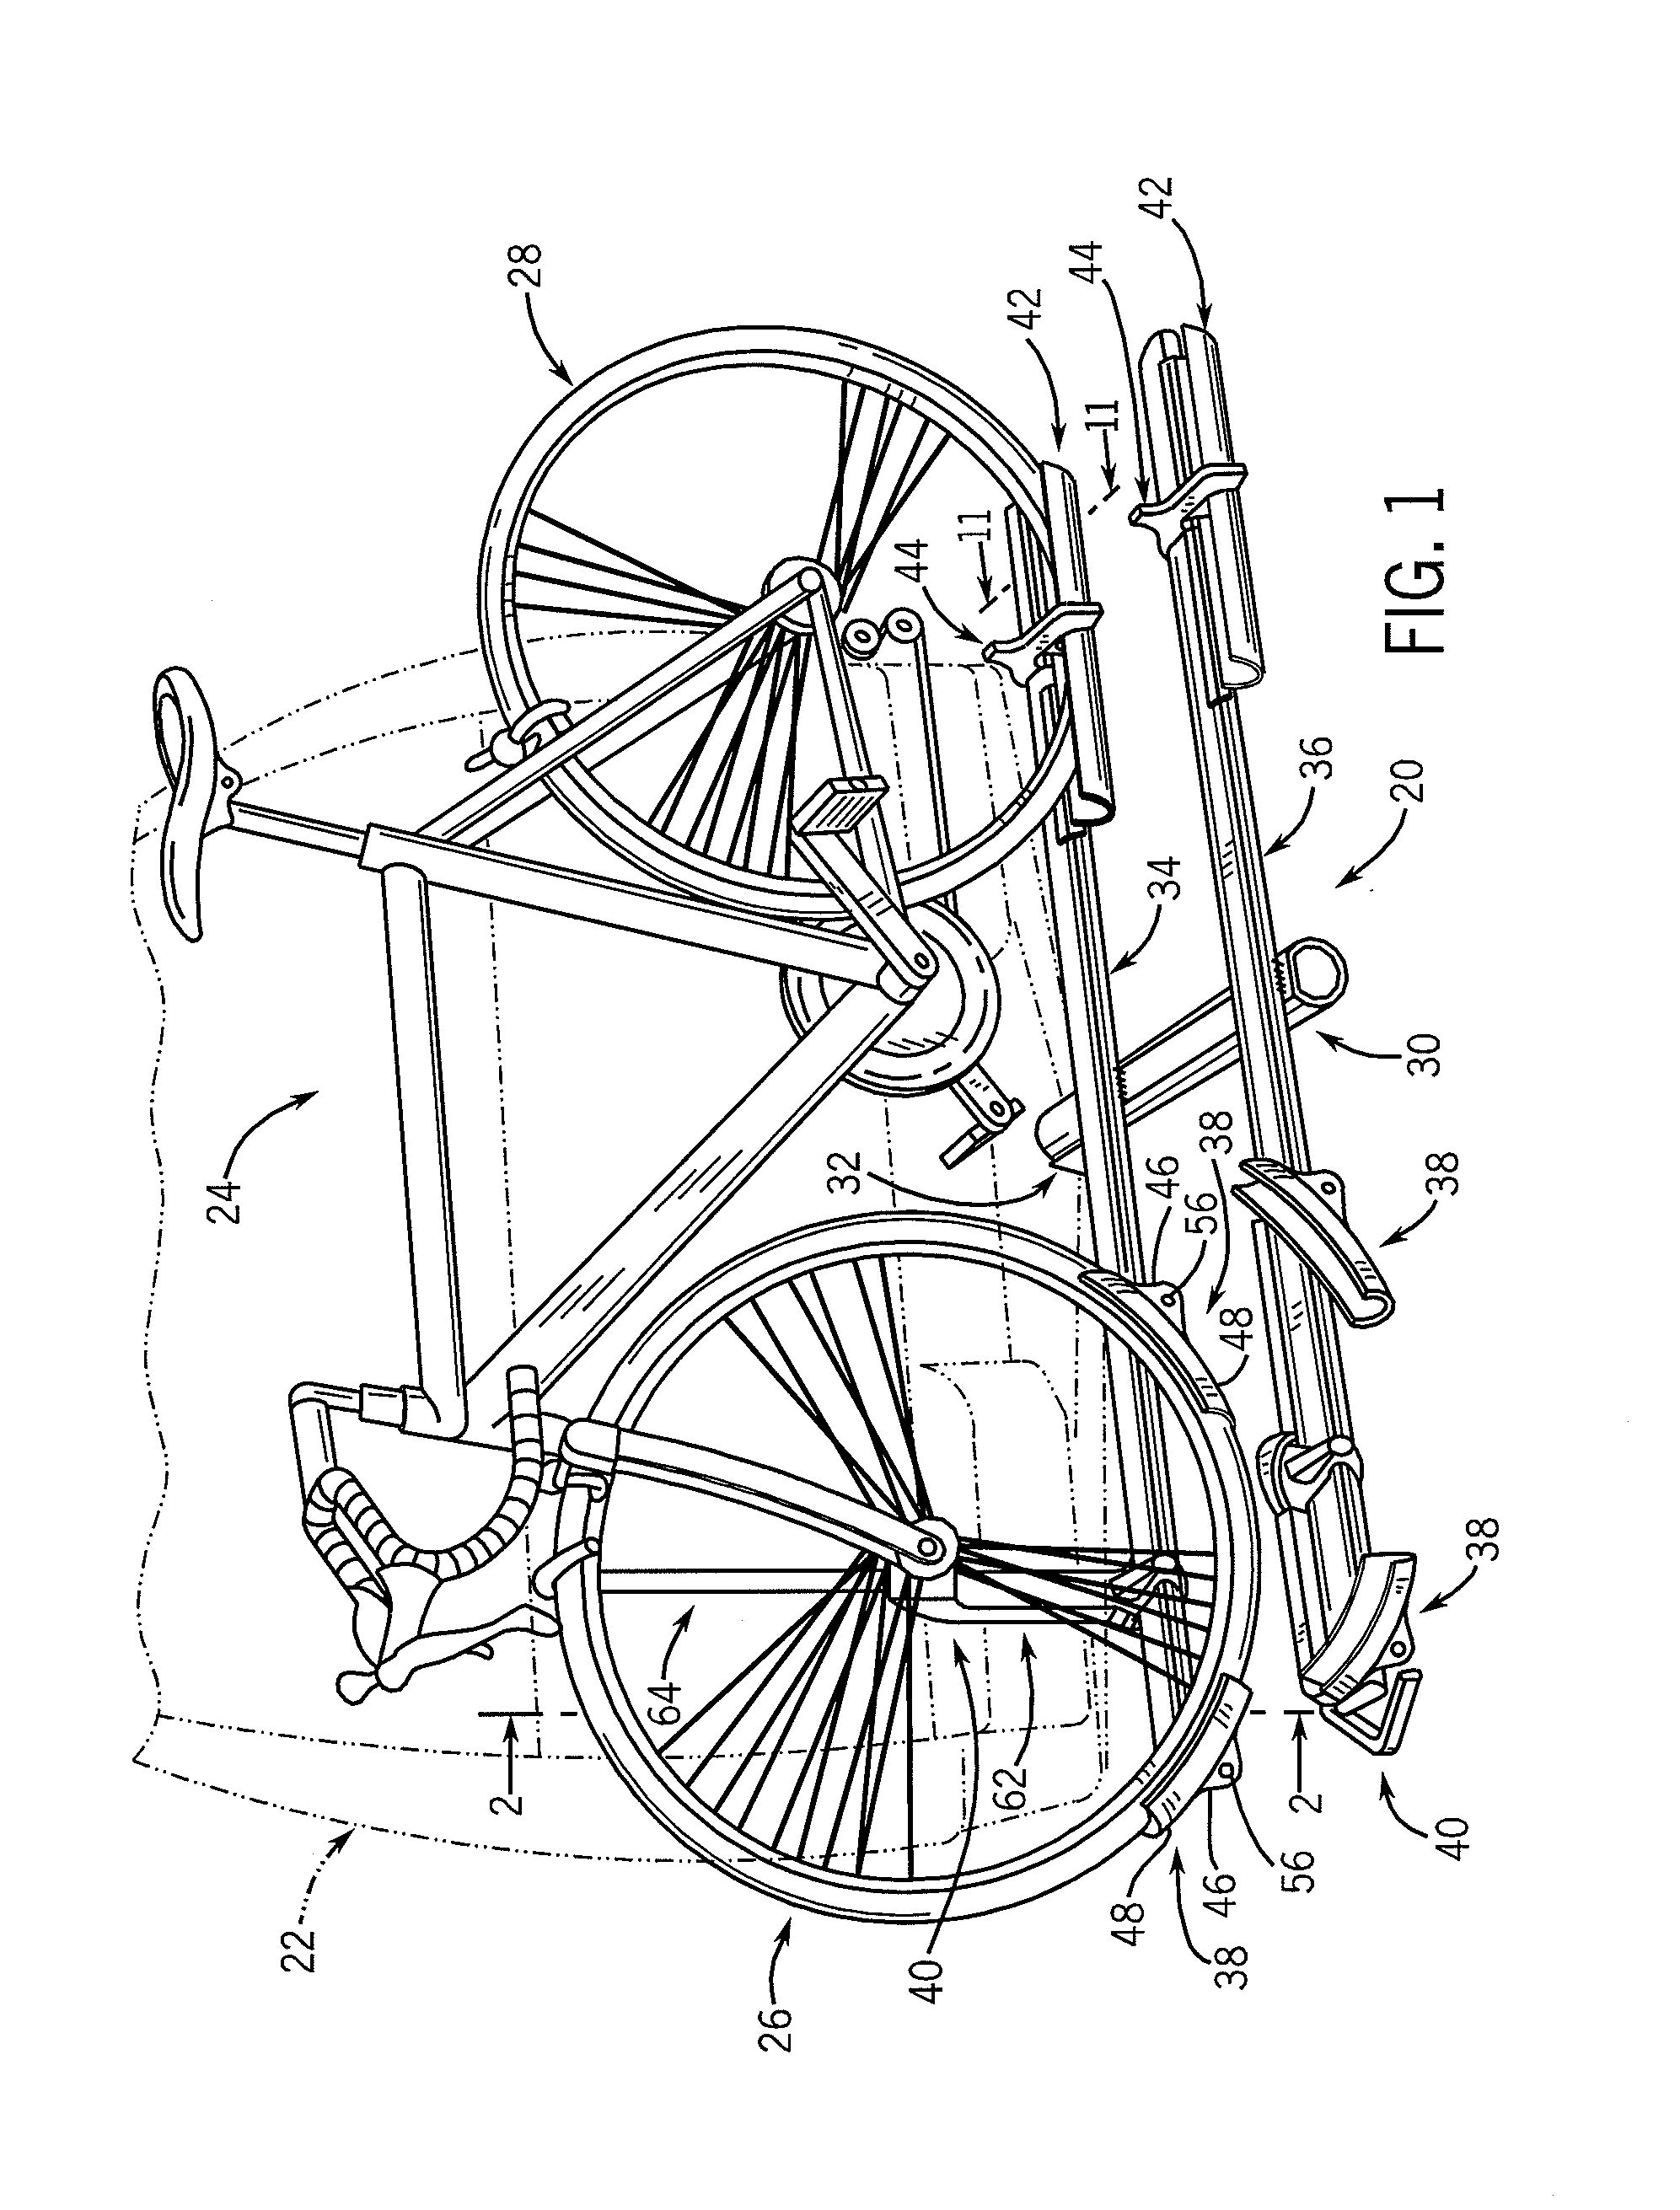 Pivoting support arrangement for maintaining a bicycle wheel in an upright position